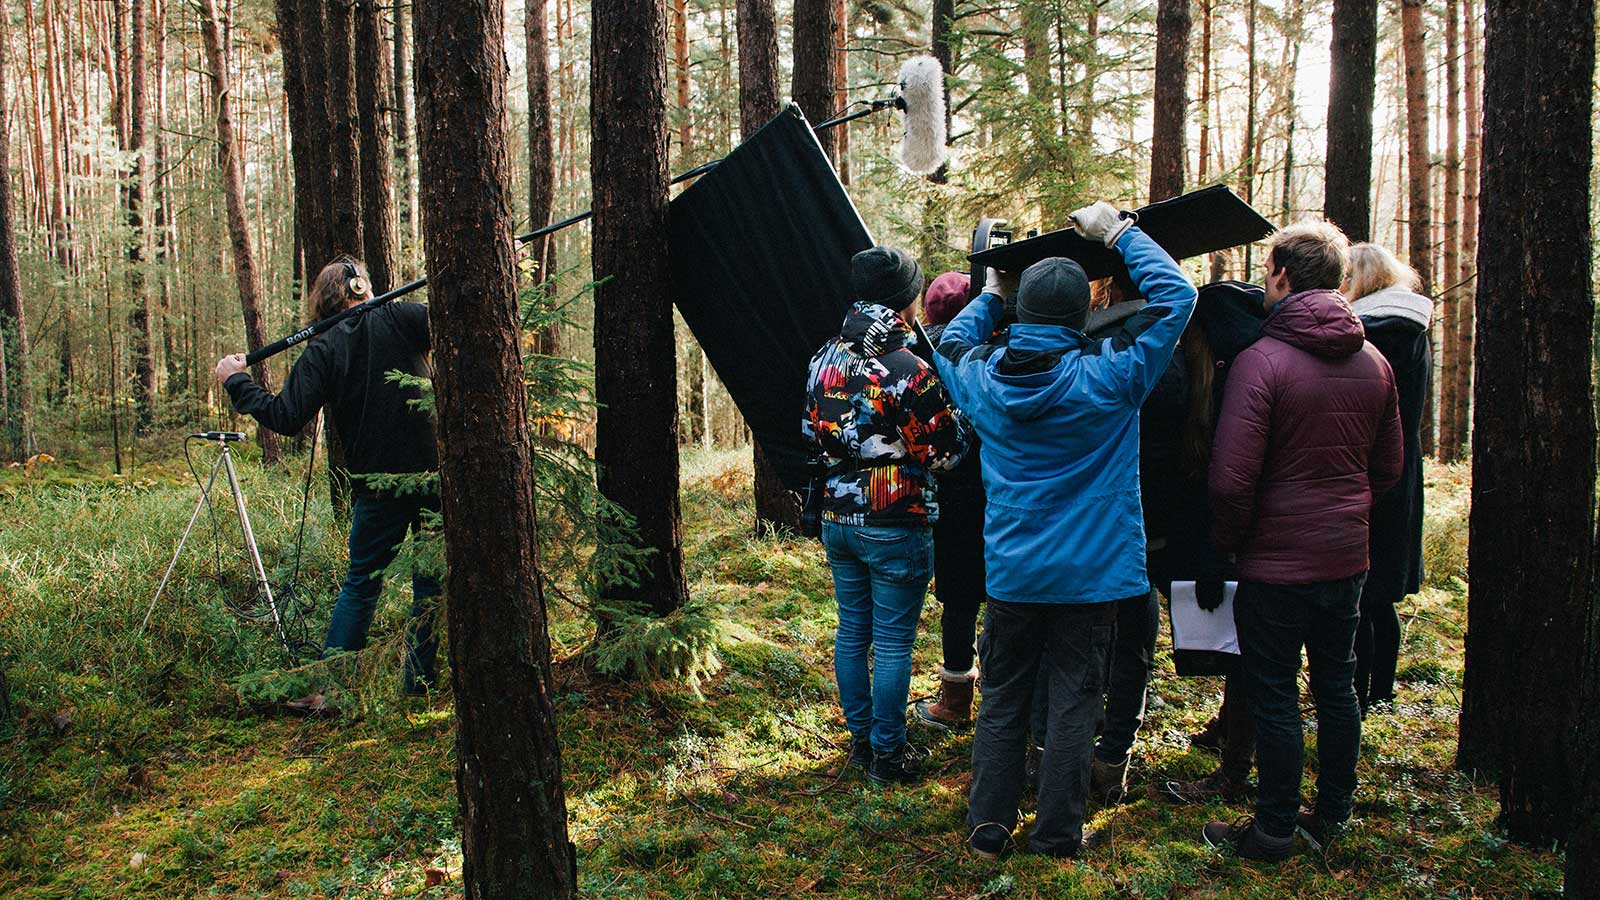 A group of crew are filming outdoors in the woods